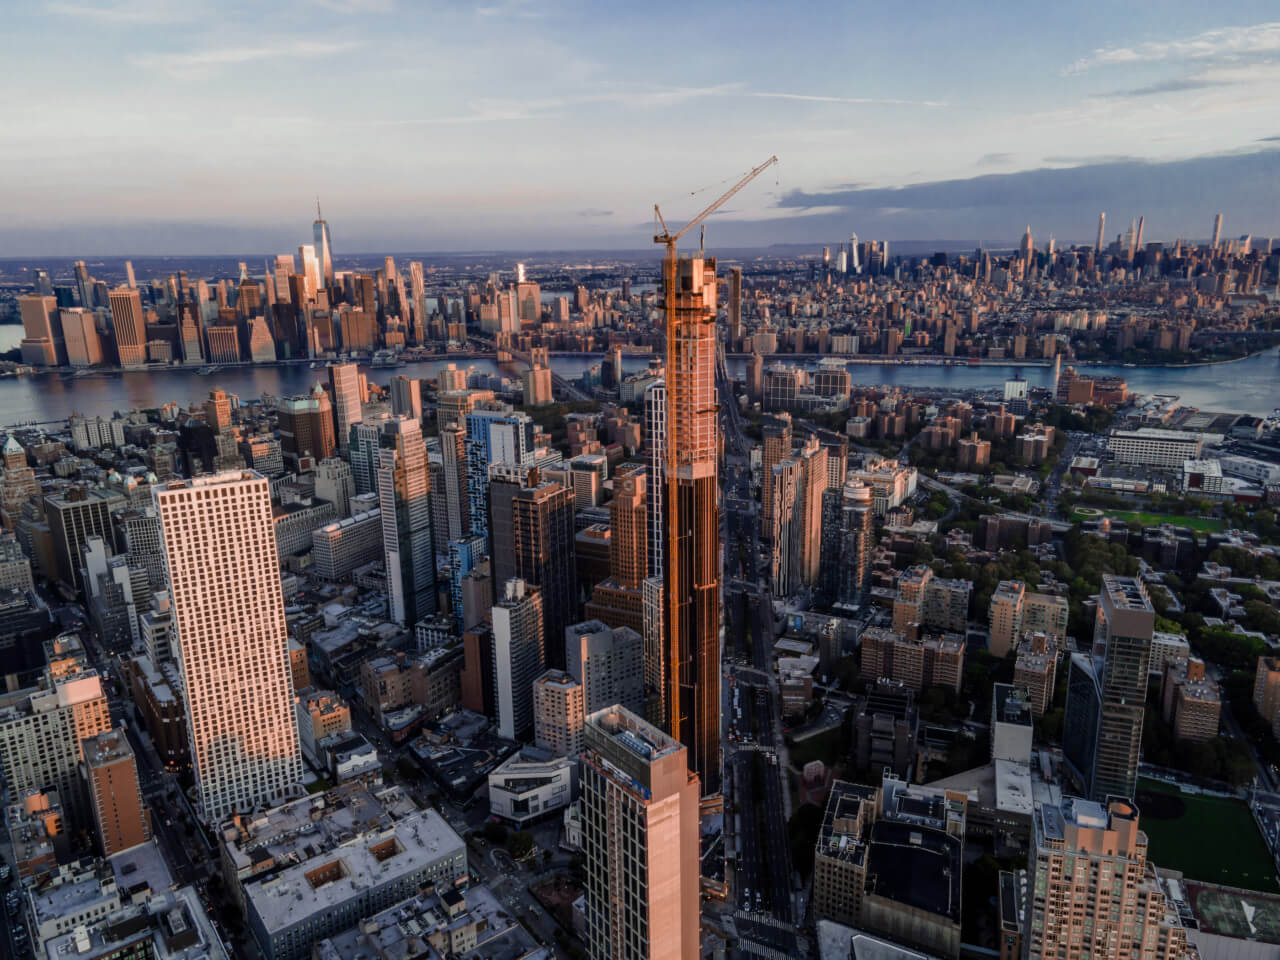 sky view of an under-construction supertall tower in downtown brooklyn